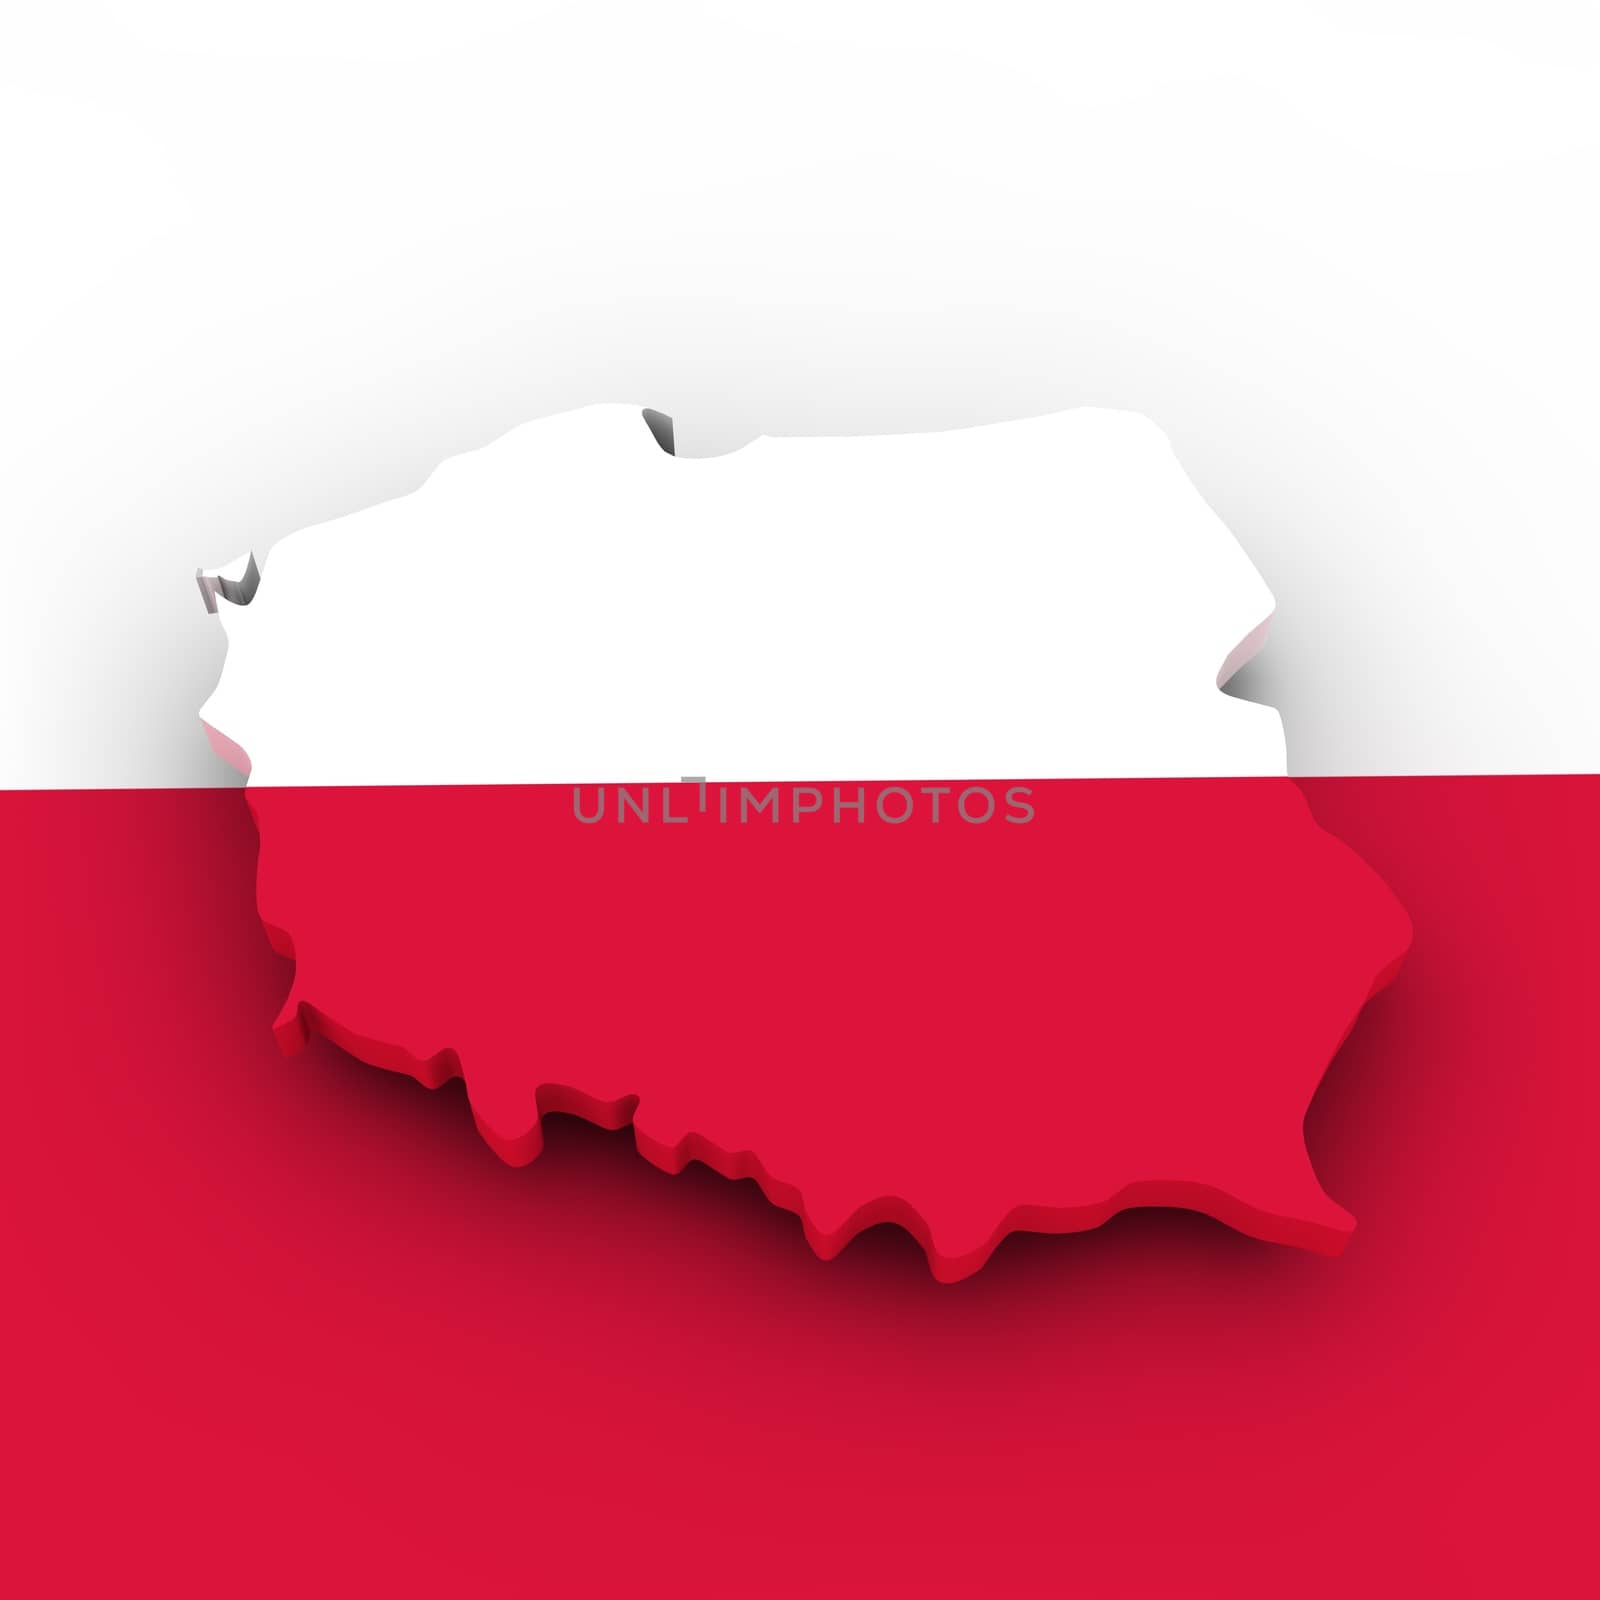 Almost all people speak Polish in Poland.